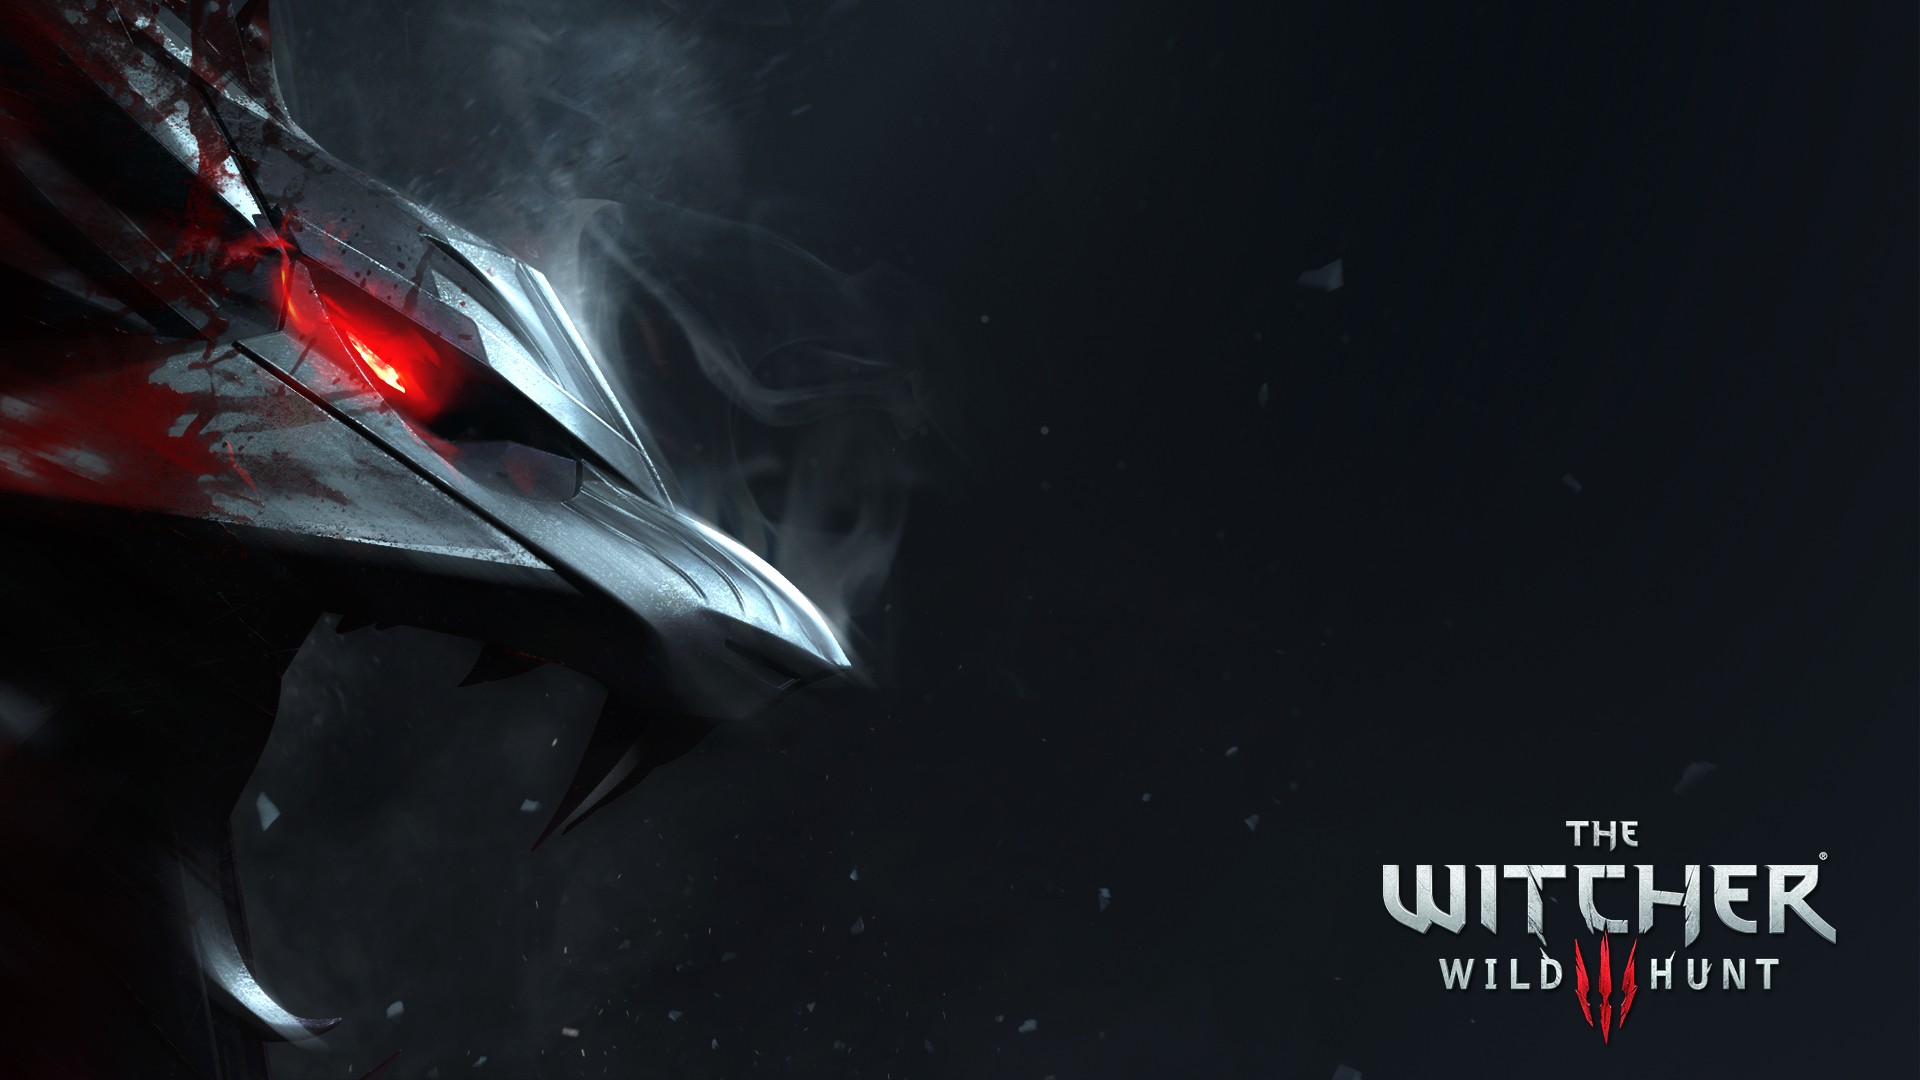 The Witcher Wild Hunt Movies Wallpaper HD with high-resolution 1920x1080 pixel. You can use this poster wallpaper for your Desktop Computers, Mac Screensavers, Windows Backgrounds, iPhone Wallpapers, Tablet or Android Lock screen and another Mobile device